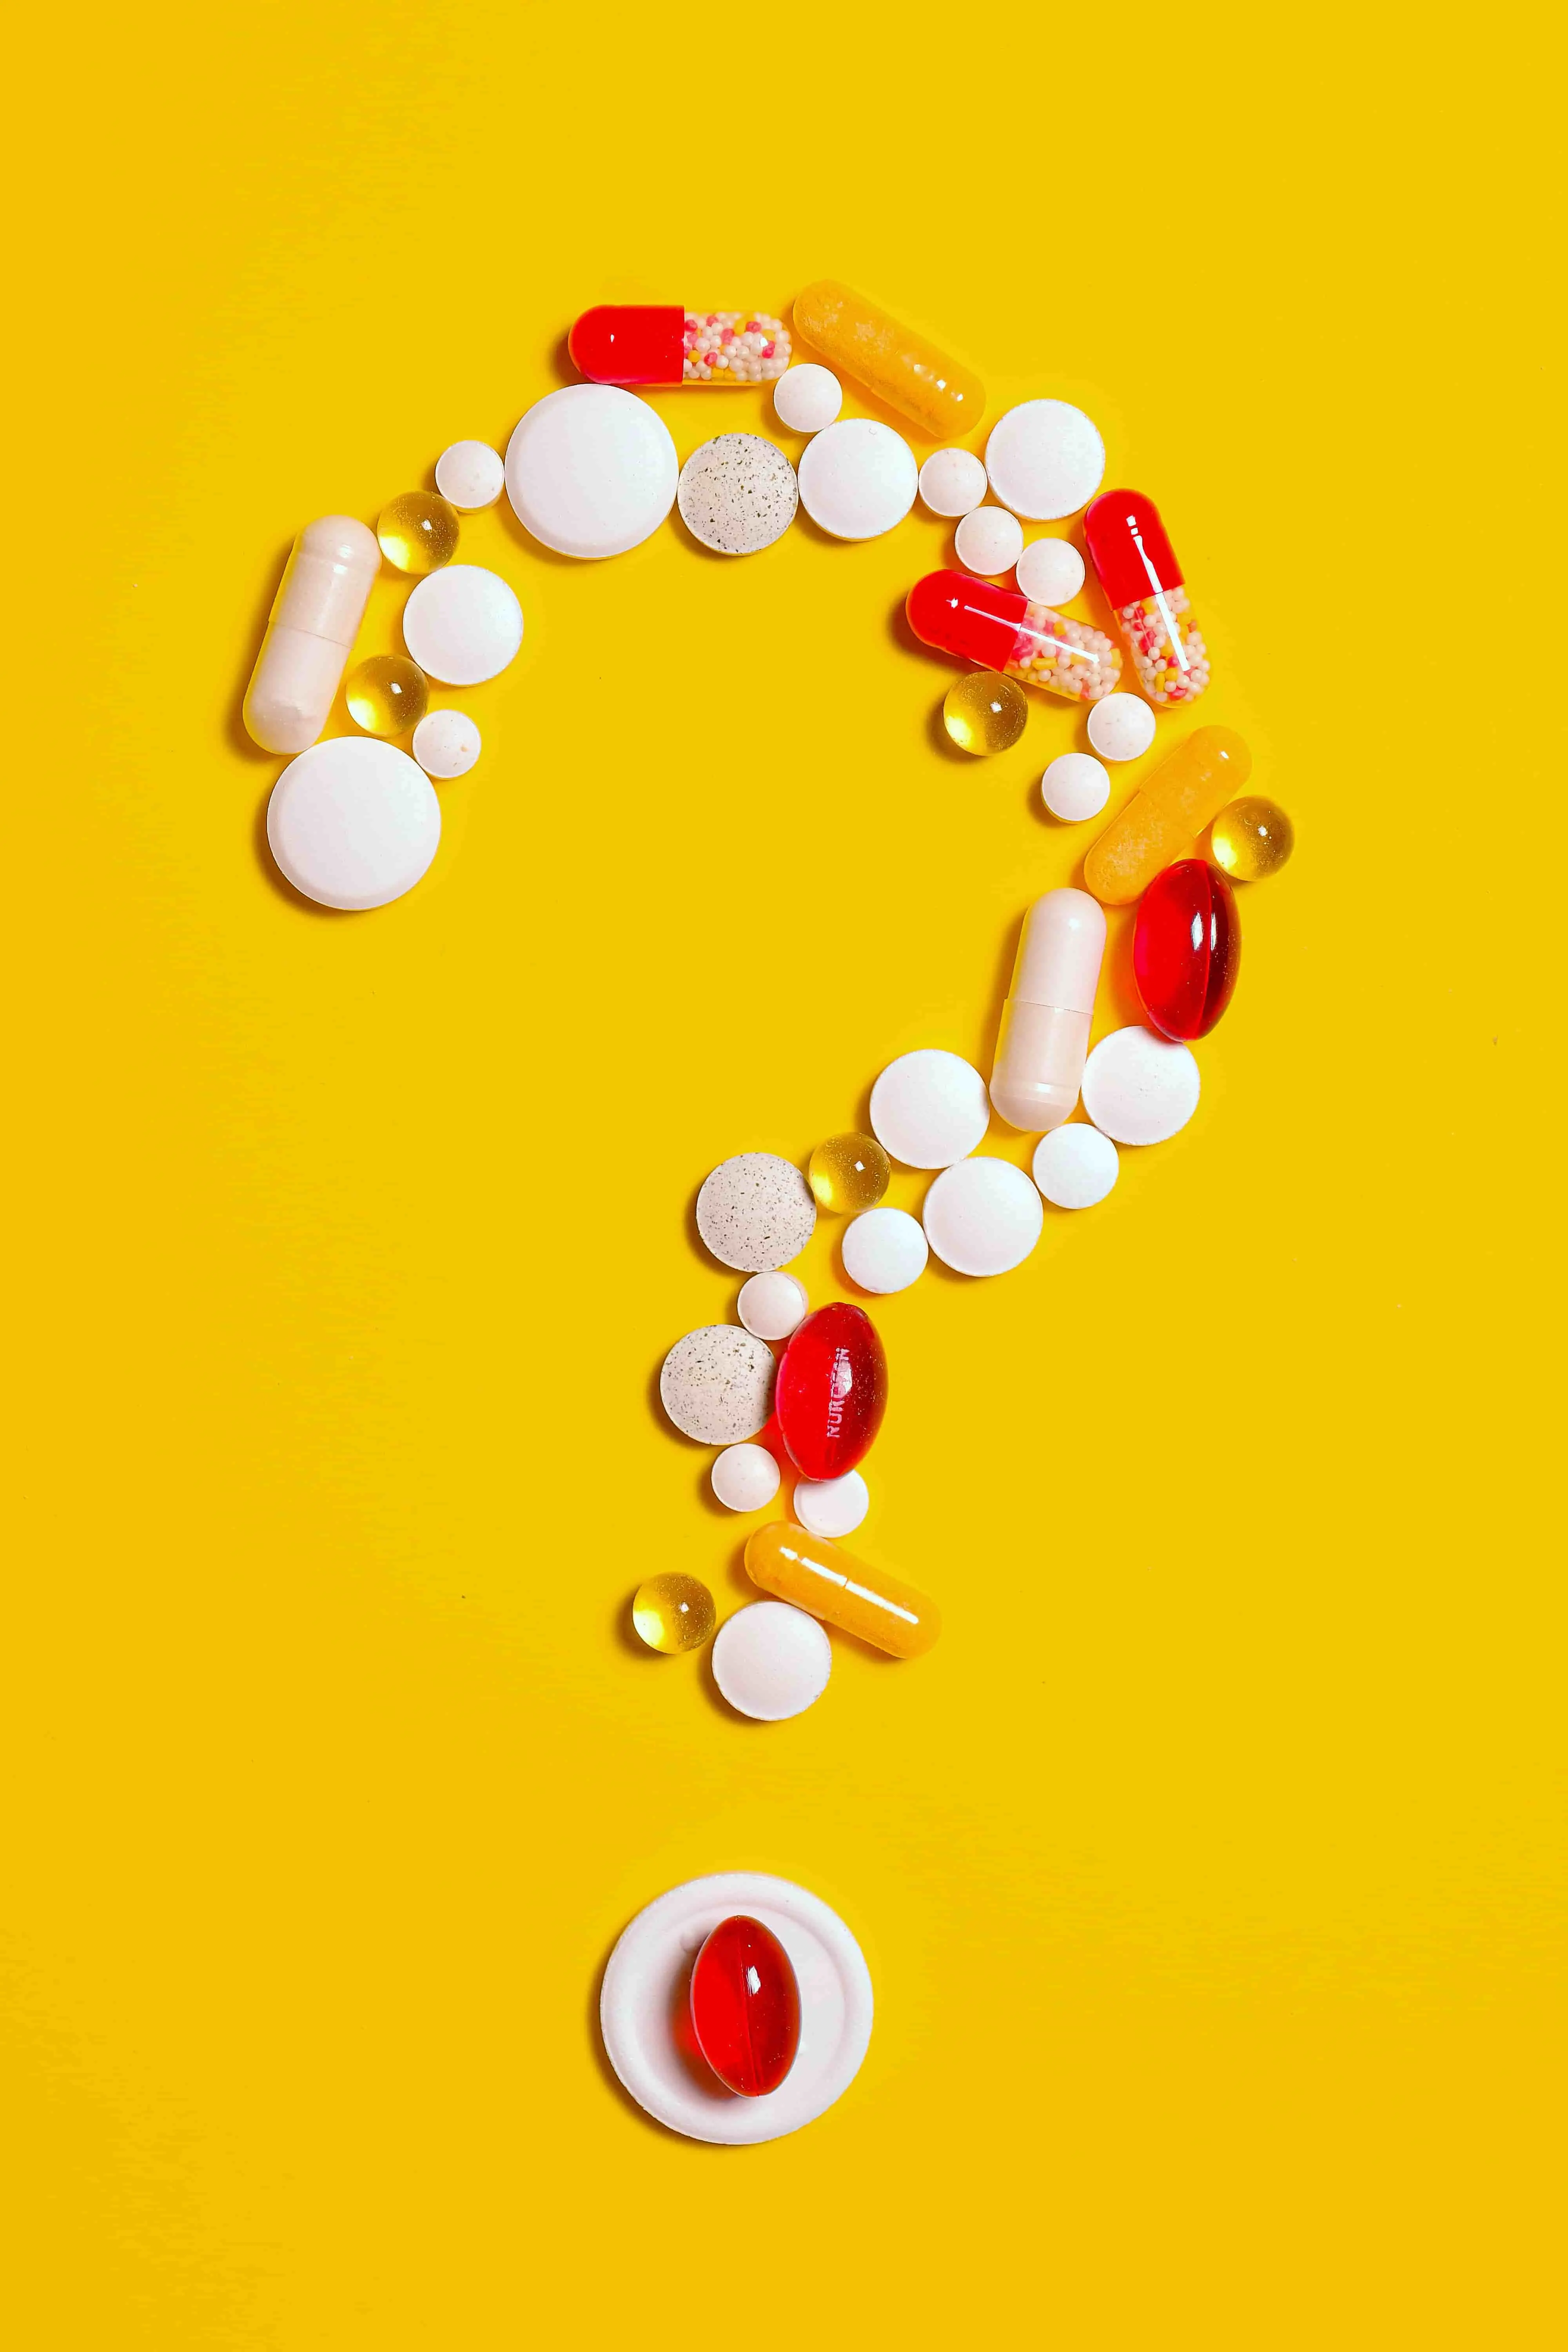 Image of an assortment of tablets and capsules arranged in the shape of a question mark on a yellow background